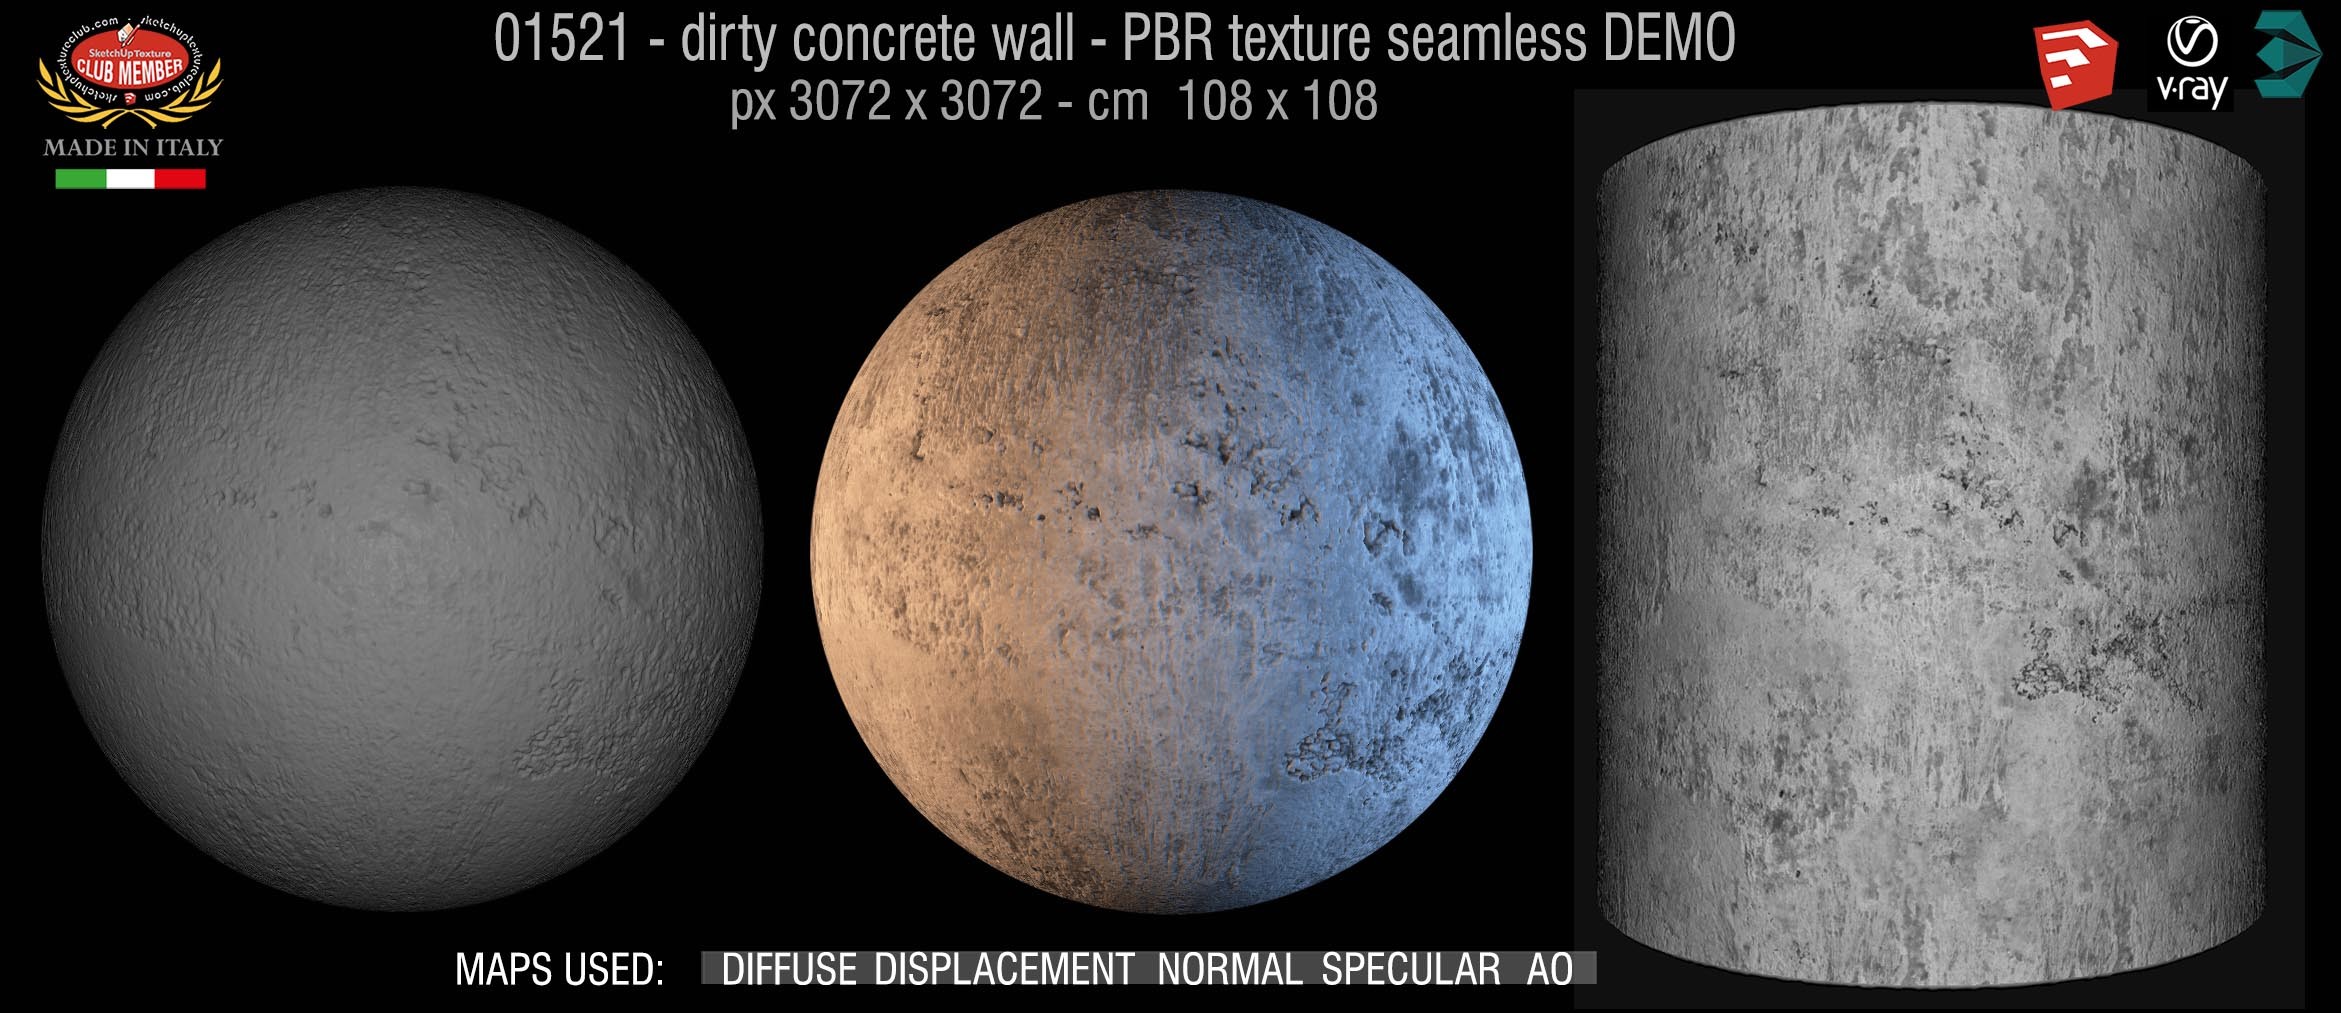 01521 Concrete bare dirty wall PBR texture seamless DEMO